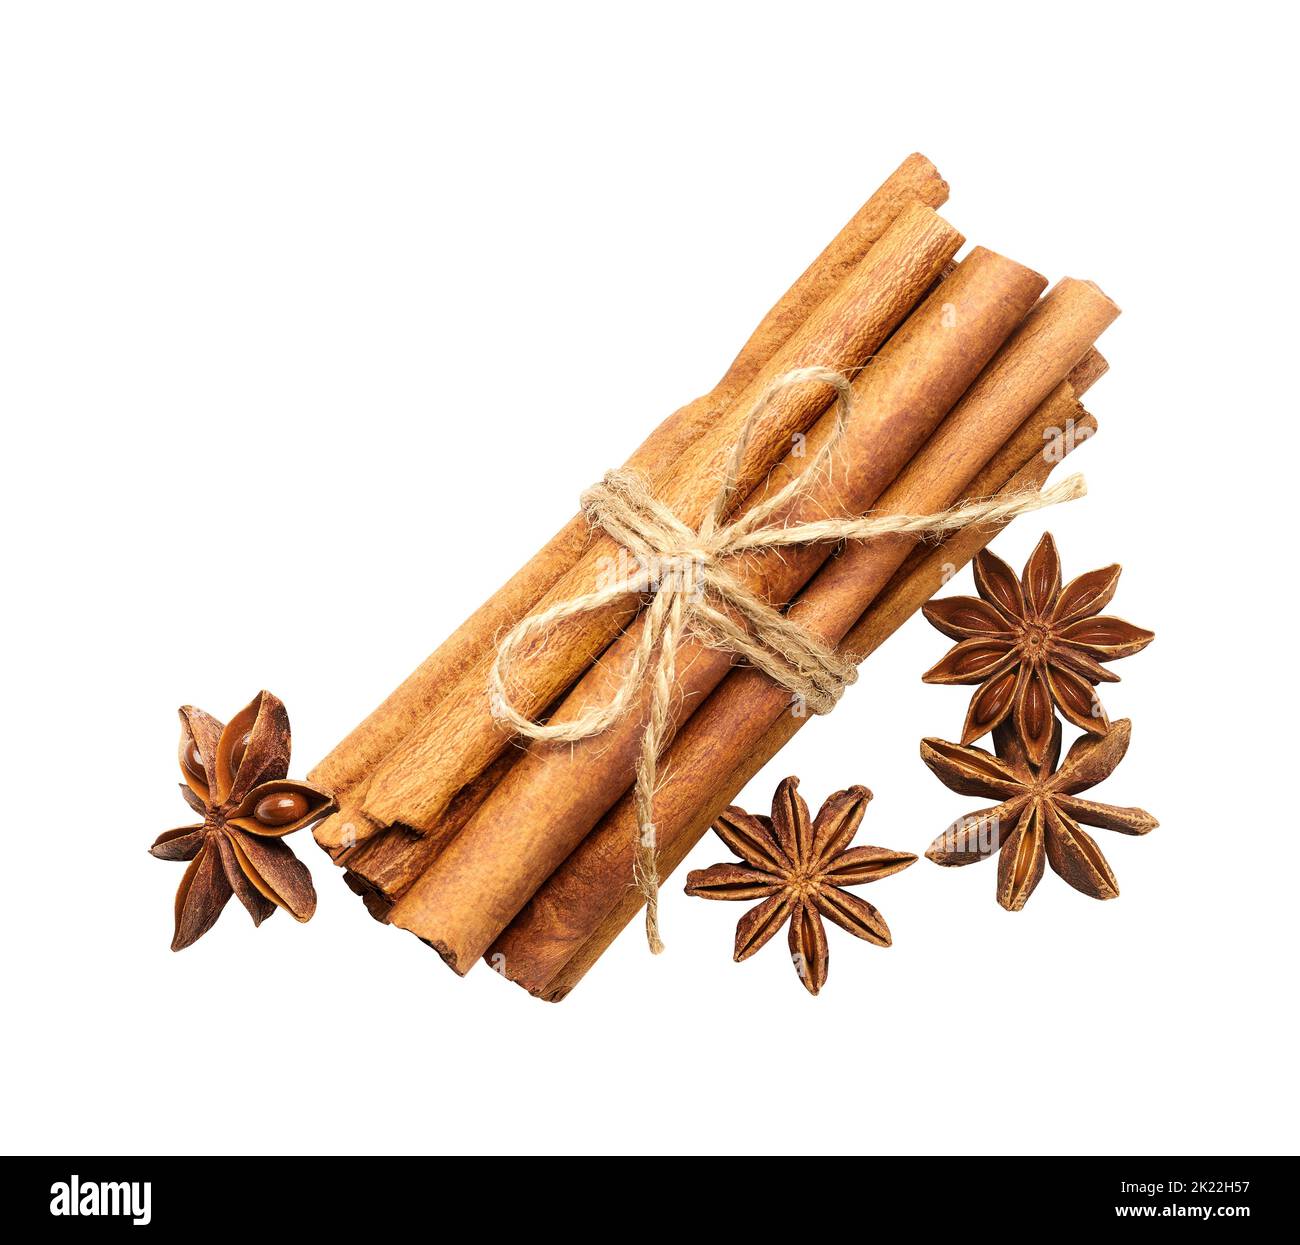 Cinnamon and star anise on white background Stock Photo